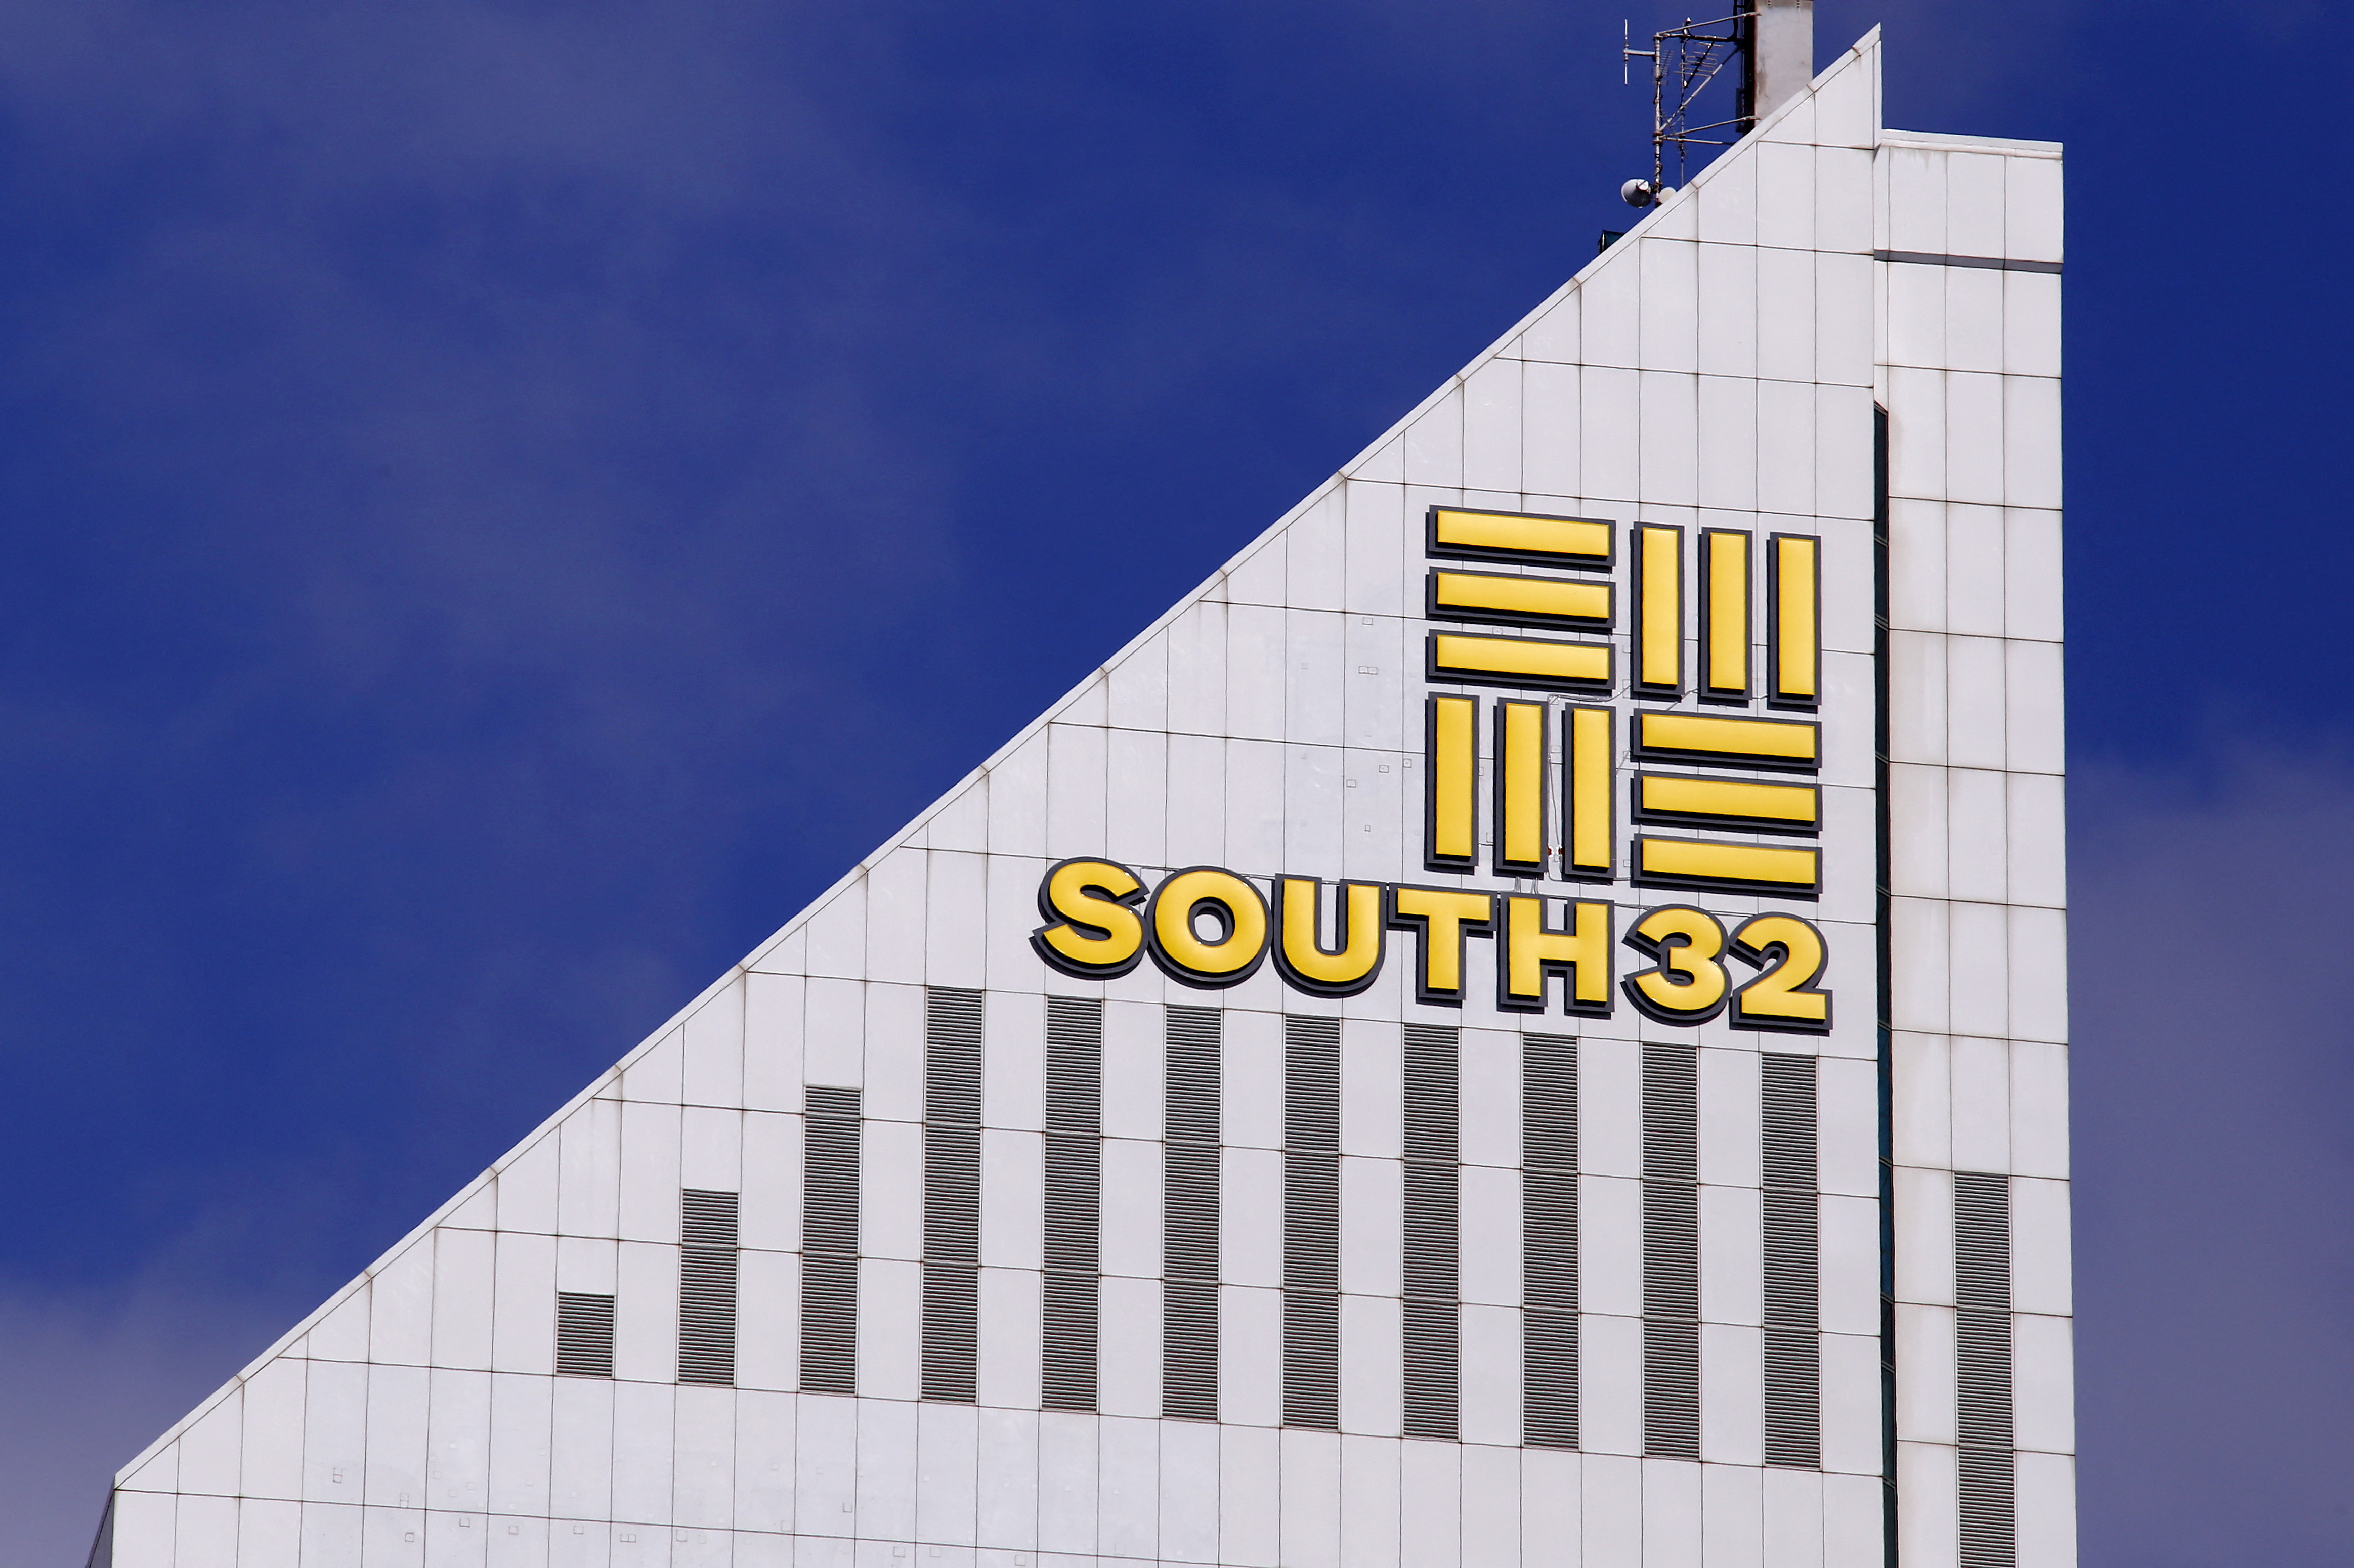 A sign adorns the building where Australian miner South32 has their office in Perth, Western Australia